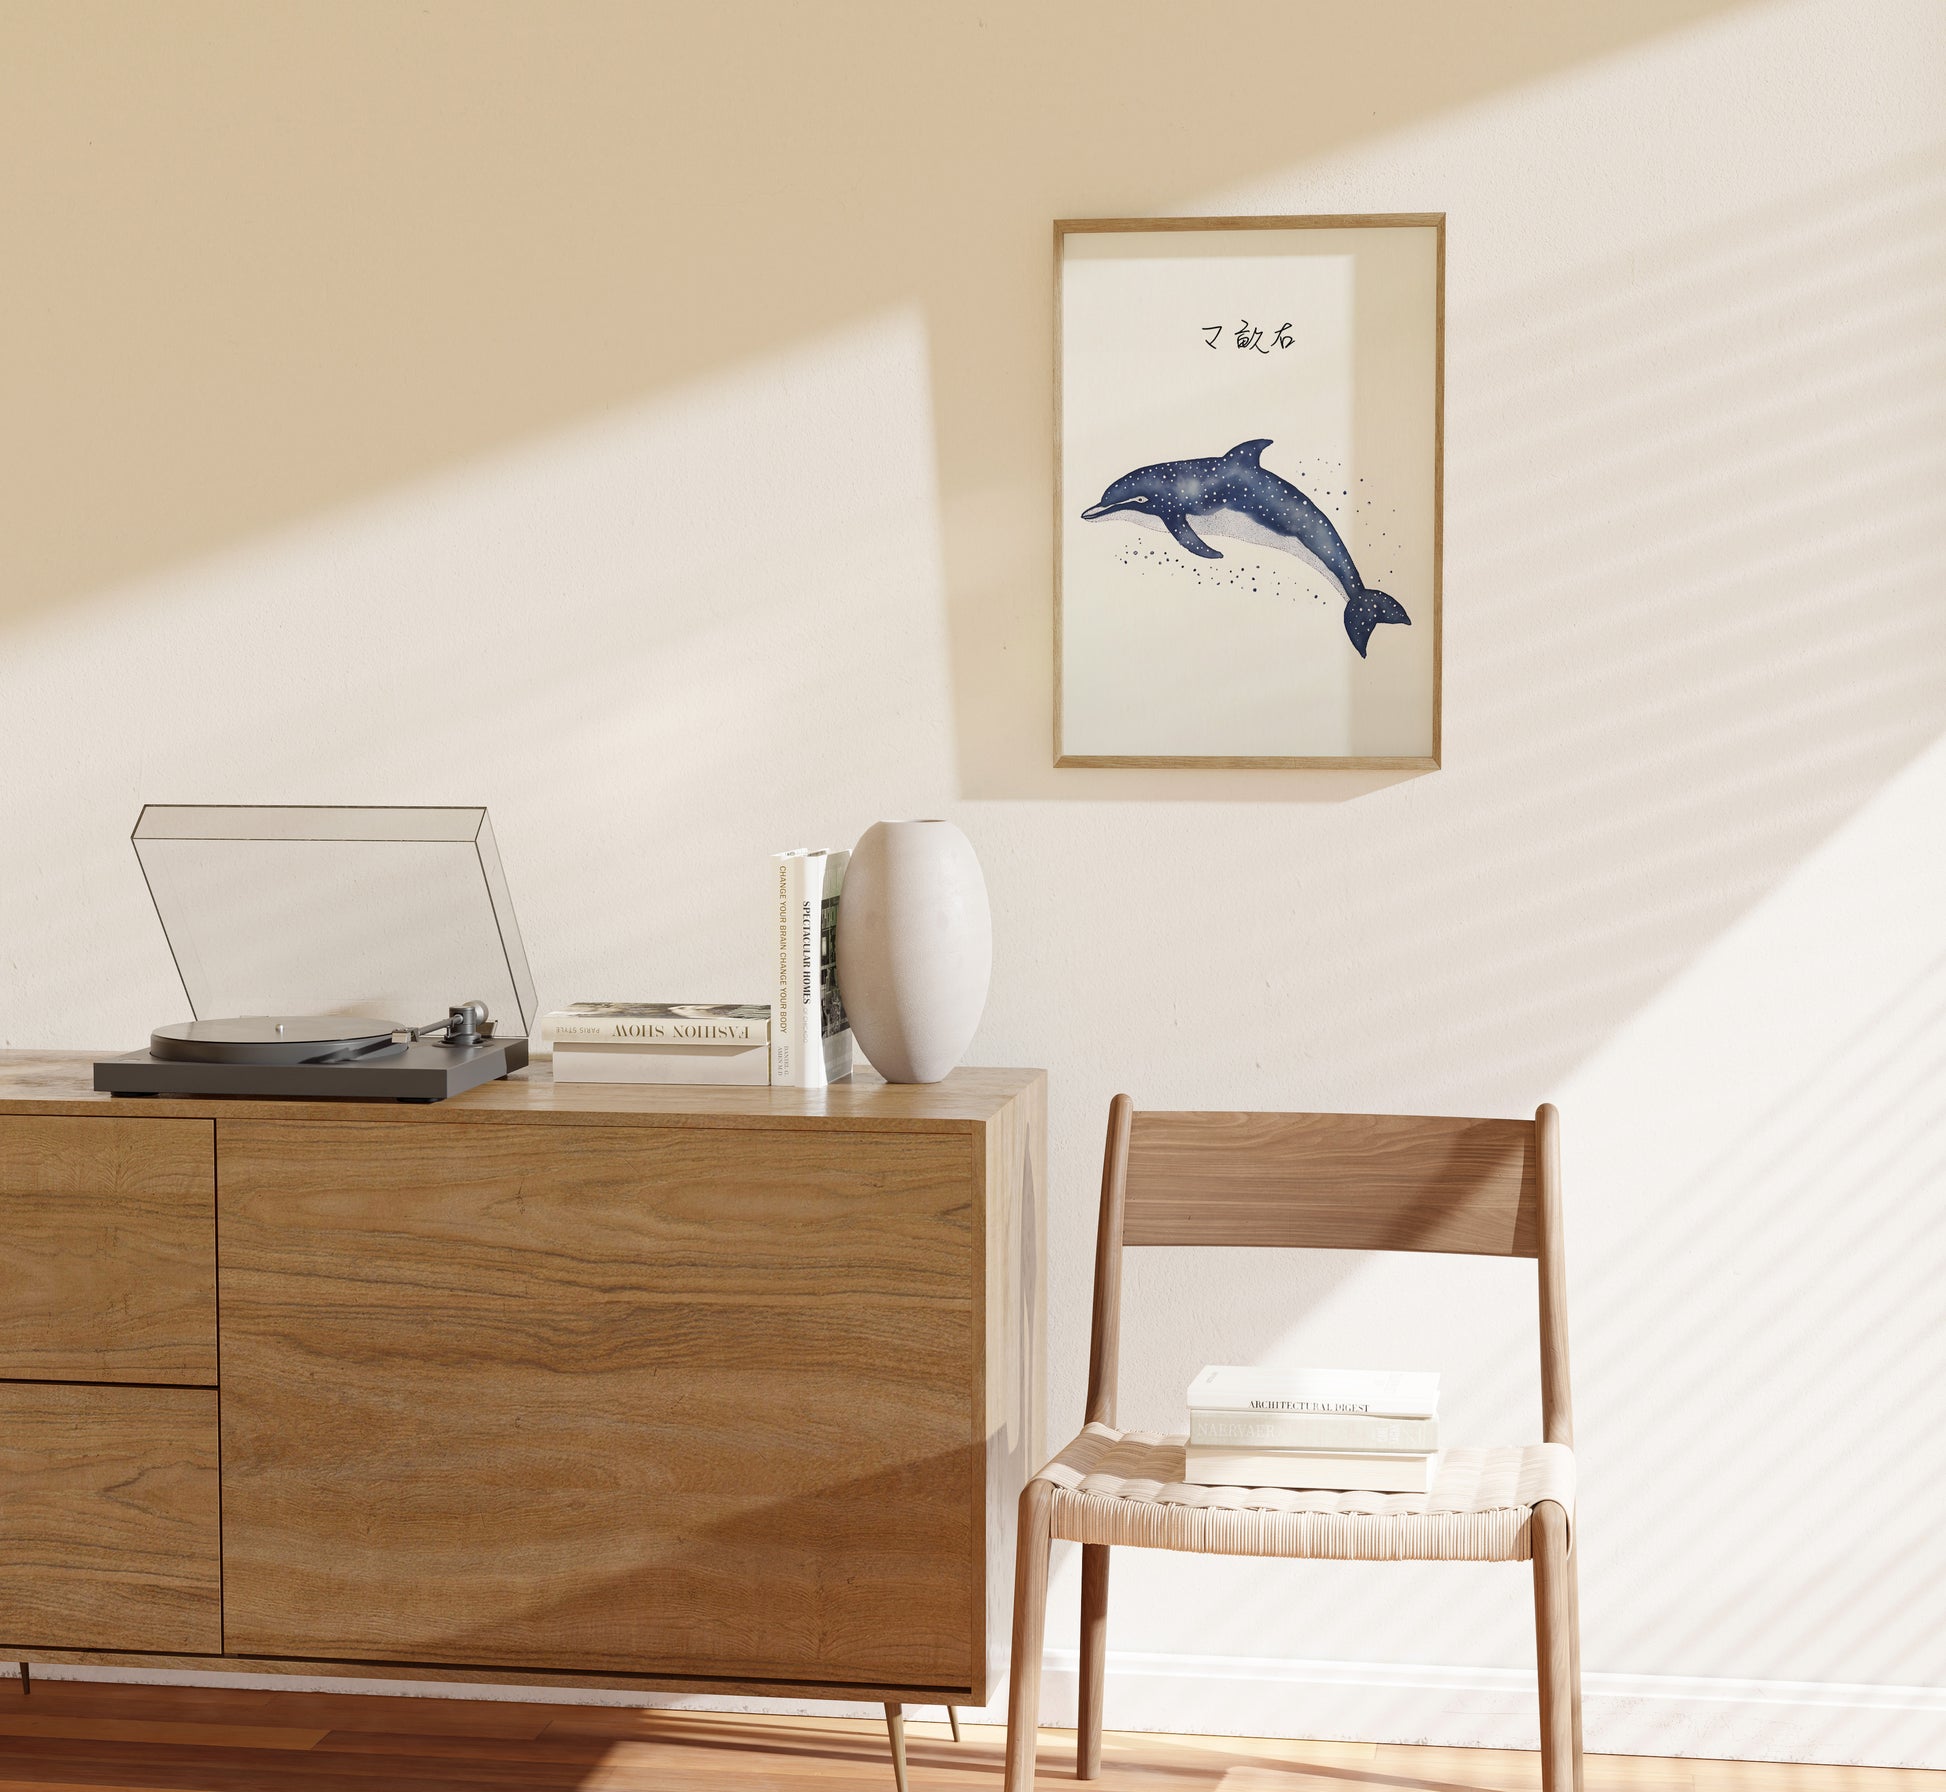 A cozy room corner with a wooden cabinet, a record player, and a framed whale illustration on the wall.